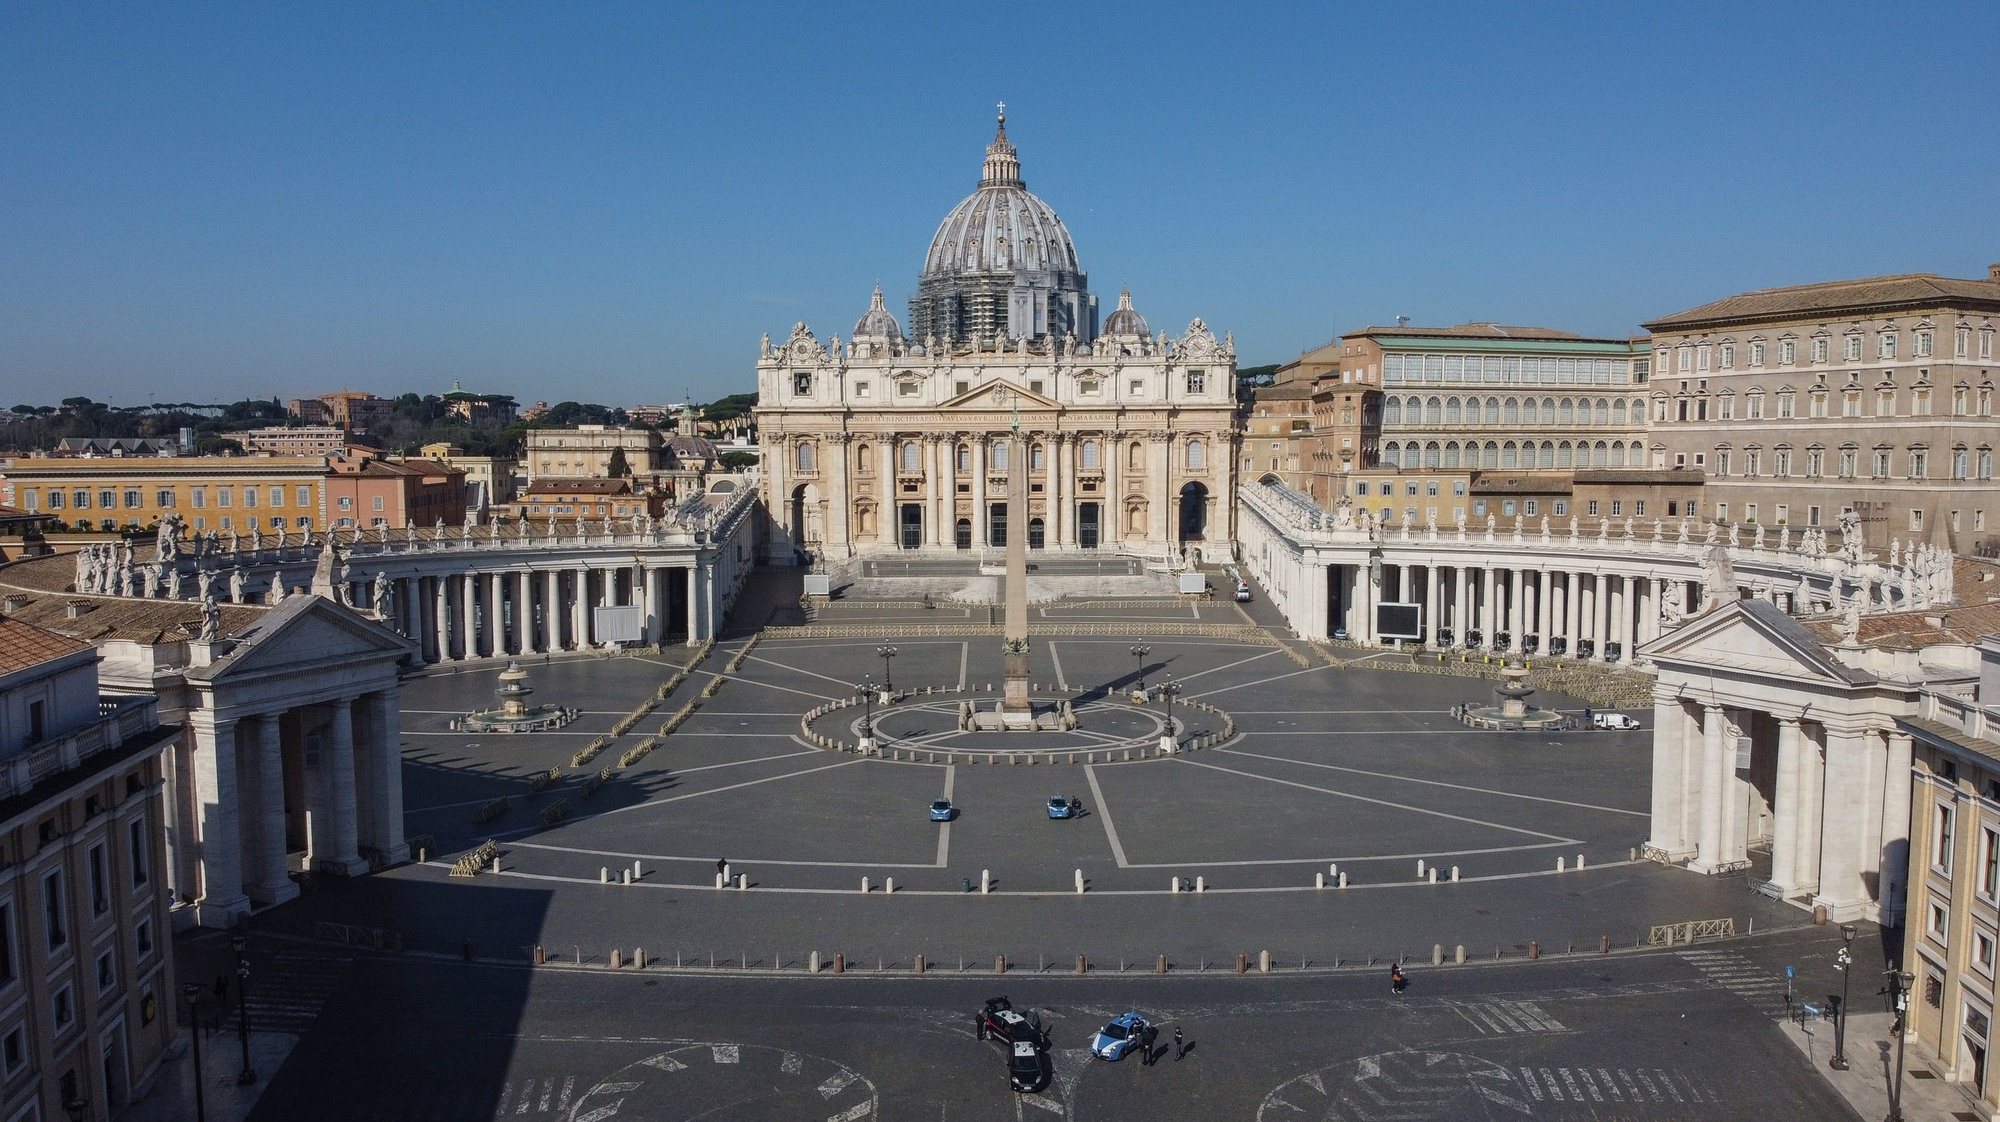 epa08342509 A Photo taken with drone showing a deserted Piazza San Pietro  with St. Peters basilica in background, during the Coronavirus emergency lockdown in Rome, Italy, 03 April 2020. Police and soldiers are deployed across the country to ensure that citizens comply with the stay-at-home orders in a bid to slow down the wide spread of the pandemic COVID-19 disease.  EPA/ALESSANDRO DI MEO